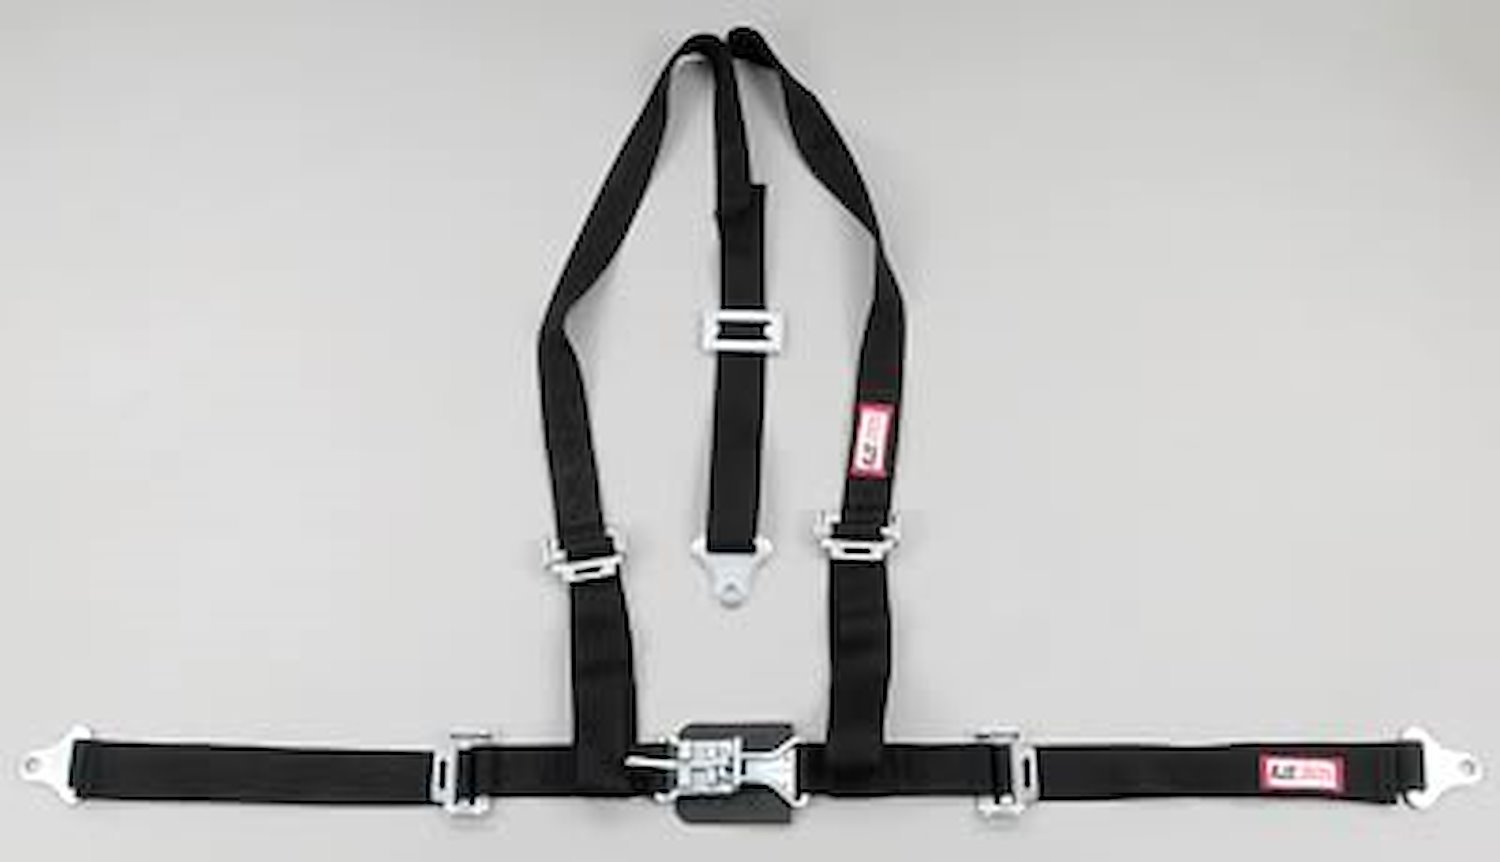 NON-SFI L&L HARNESS 3 PULL DOWN Lap Belt SNAP SEWN IN 2 S.H. Individual ROLL BAR Mount WRAP/BOLT RED